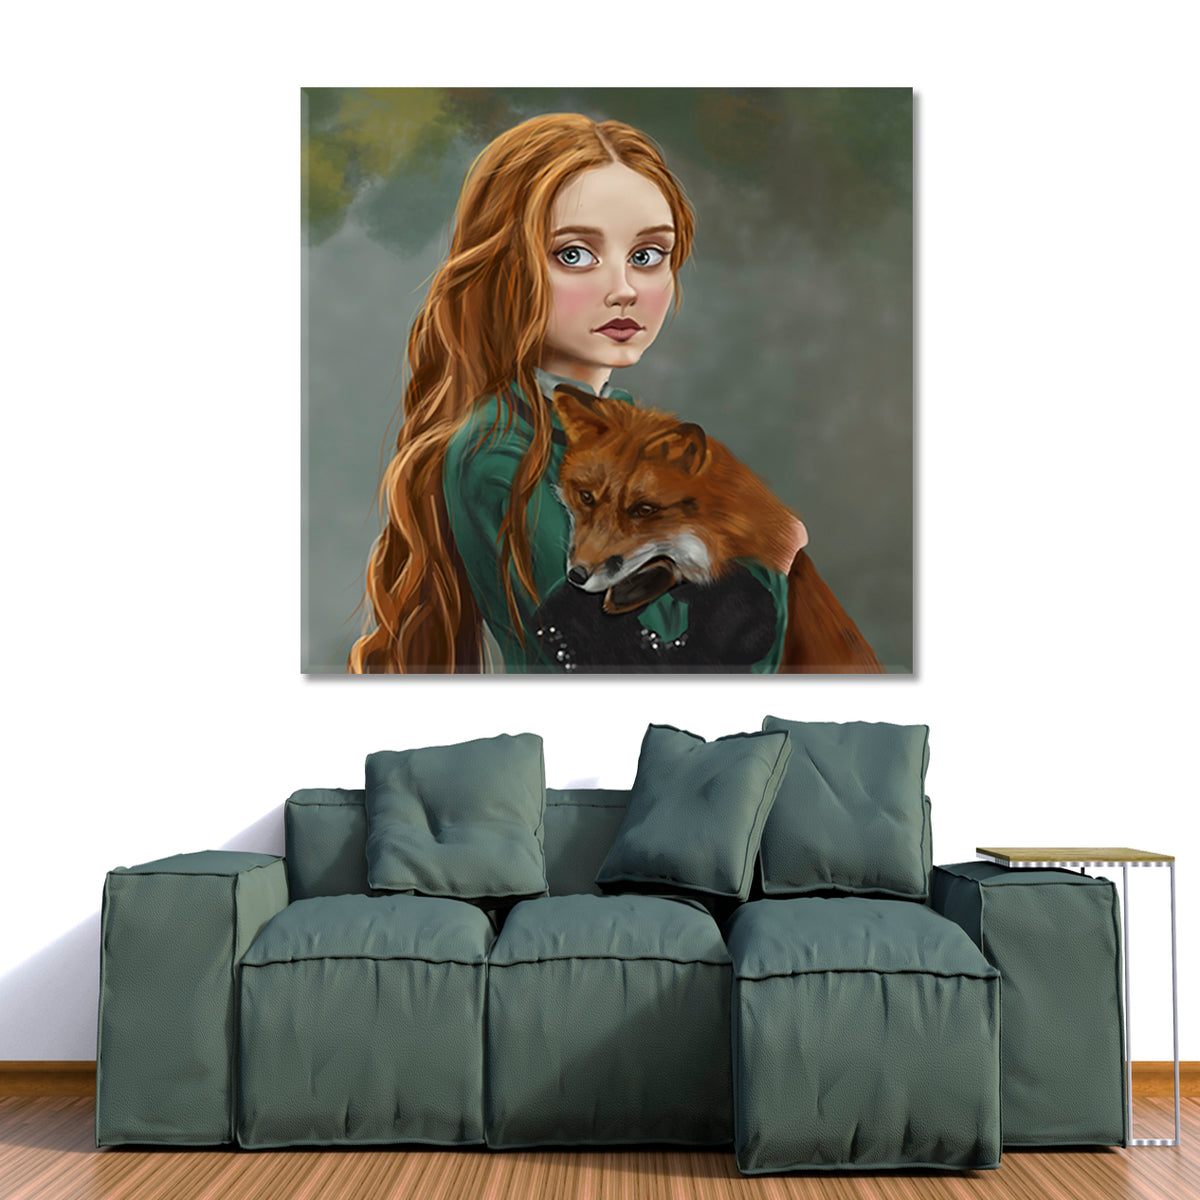 RED FOX GINGER STORY Girl Red Hair Lady Green Dress Surreal Fairy Tale Kids Room Canvas Art Print Artesty 1 Panel 12"x12" 